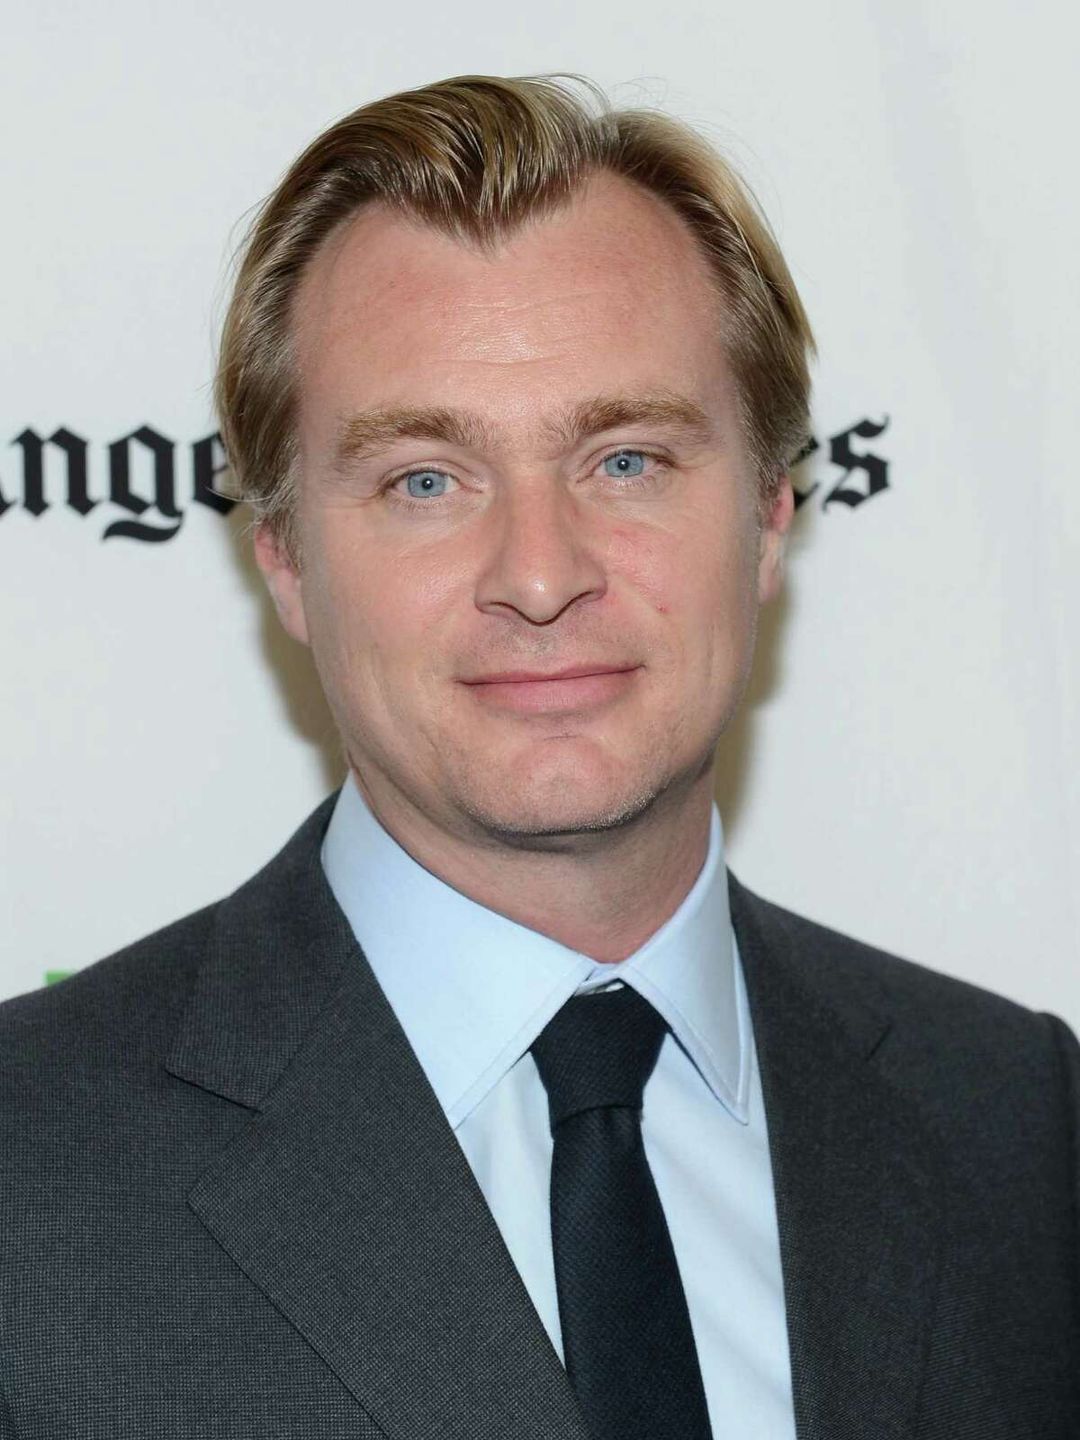 Christopher Nolan does he have a wife